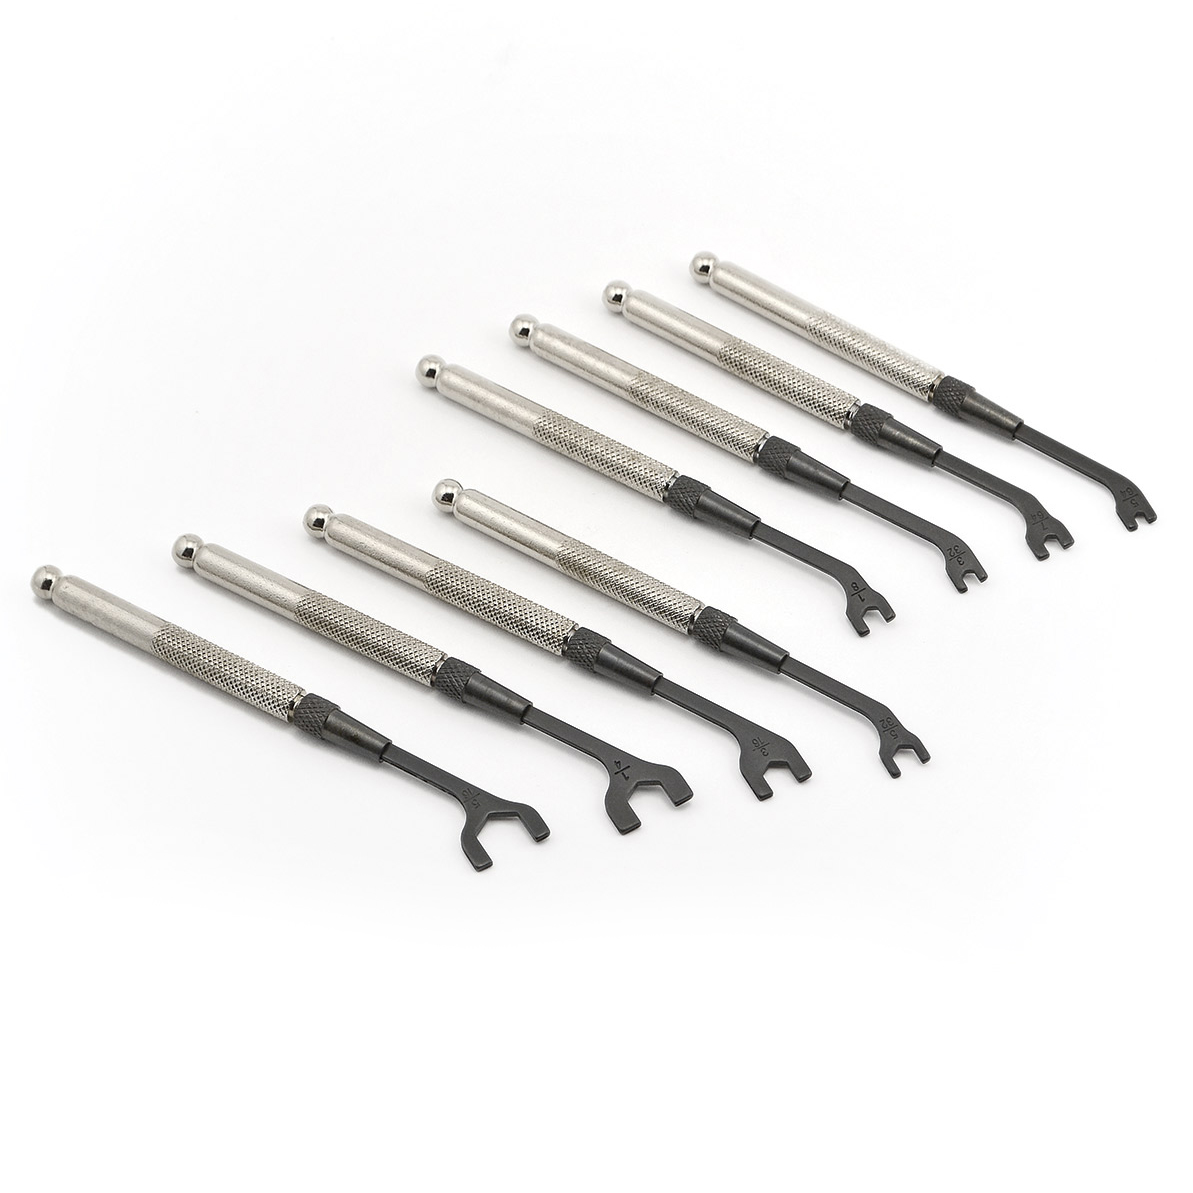 STANDARD WRENCH SET (8pc)